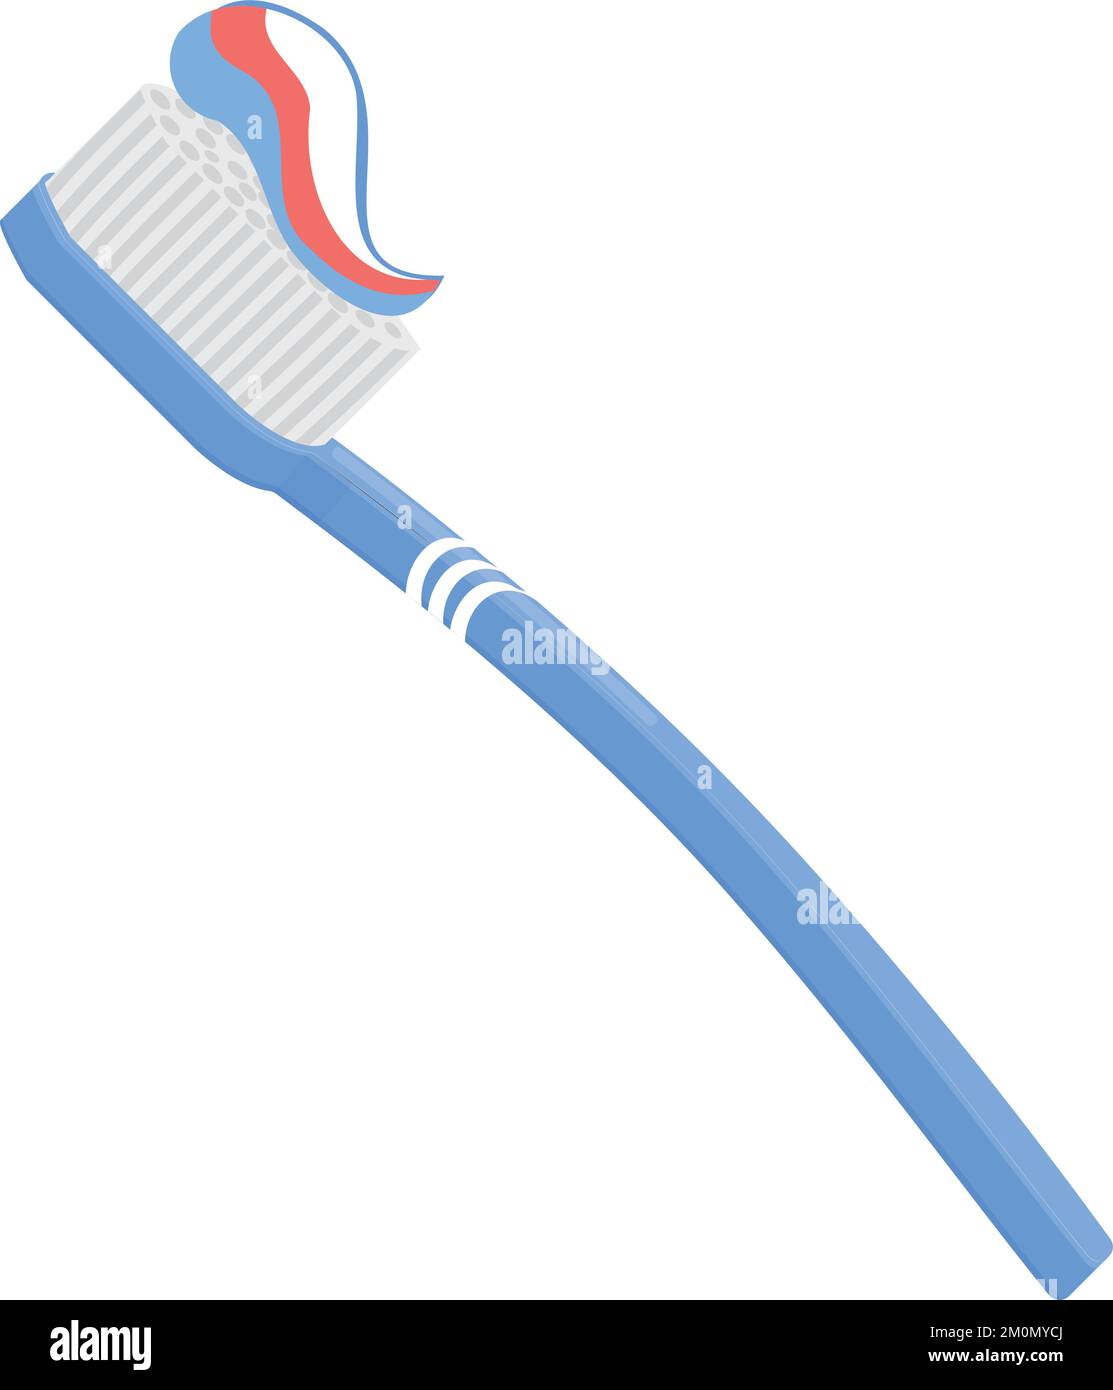 Tooth brushing icon. Toothpaste on toothbrush cartoon icon Stock Vector